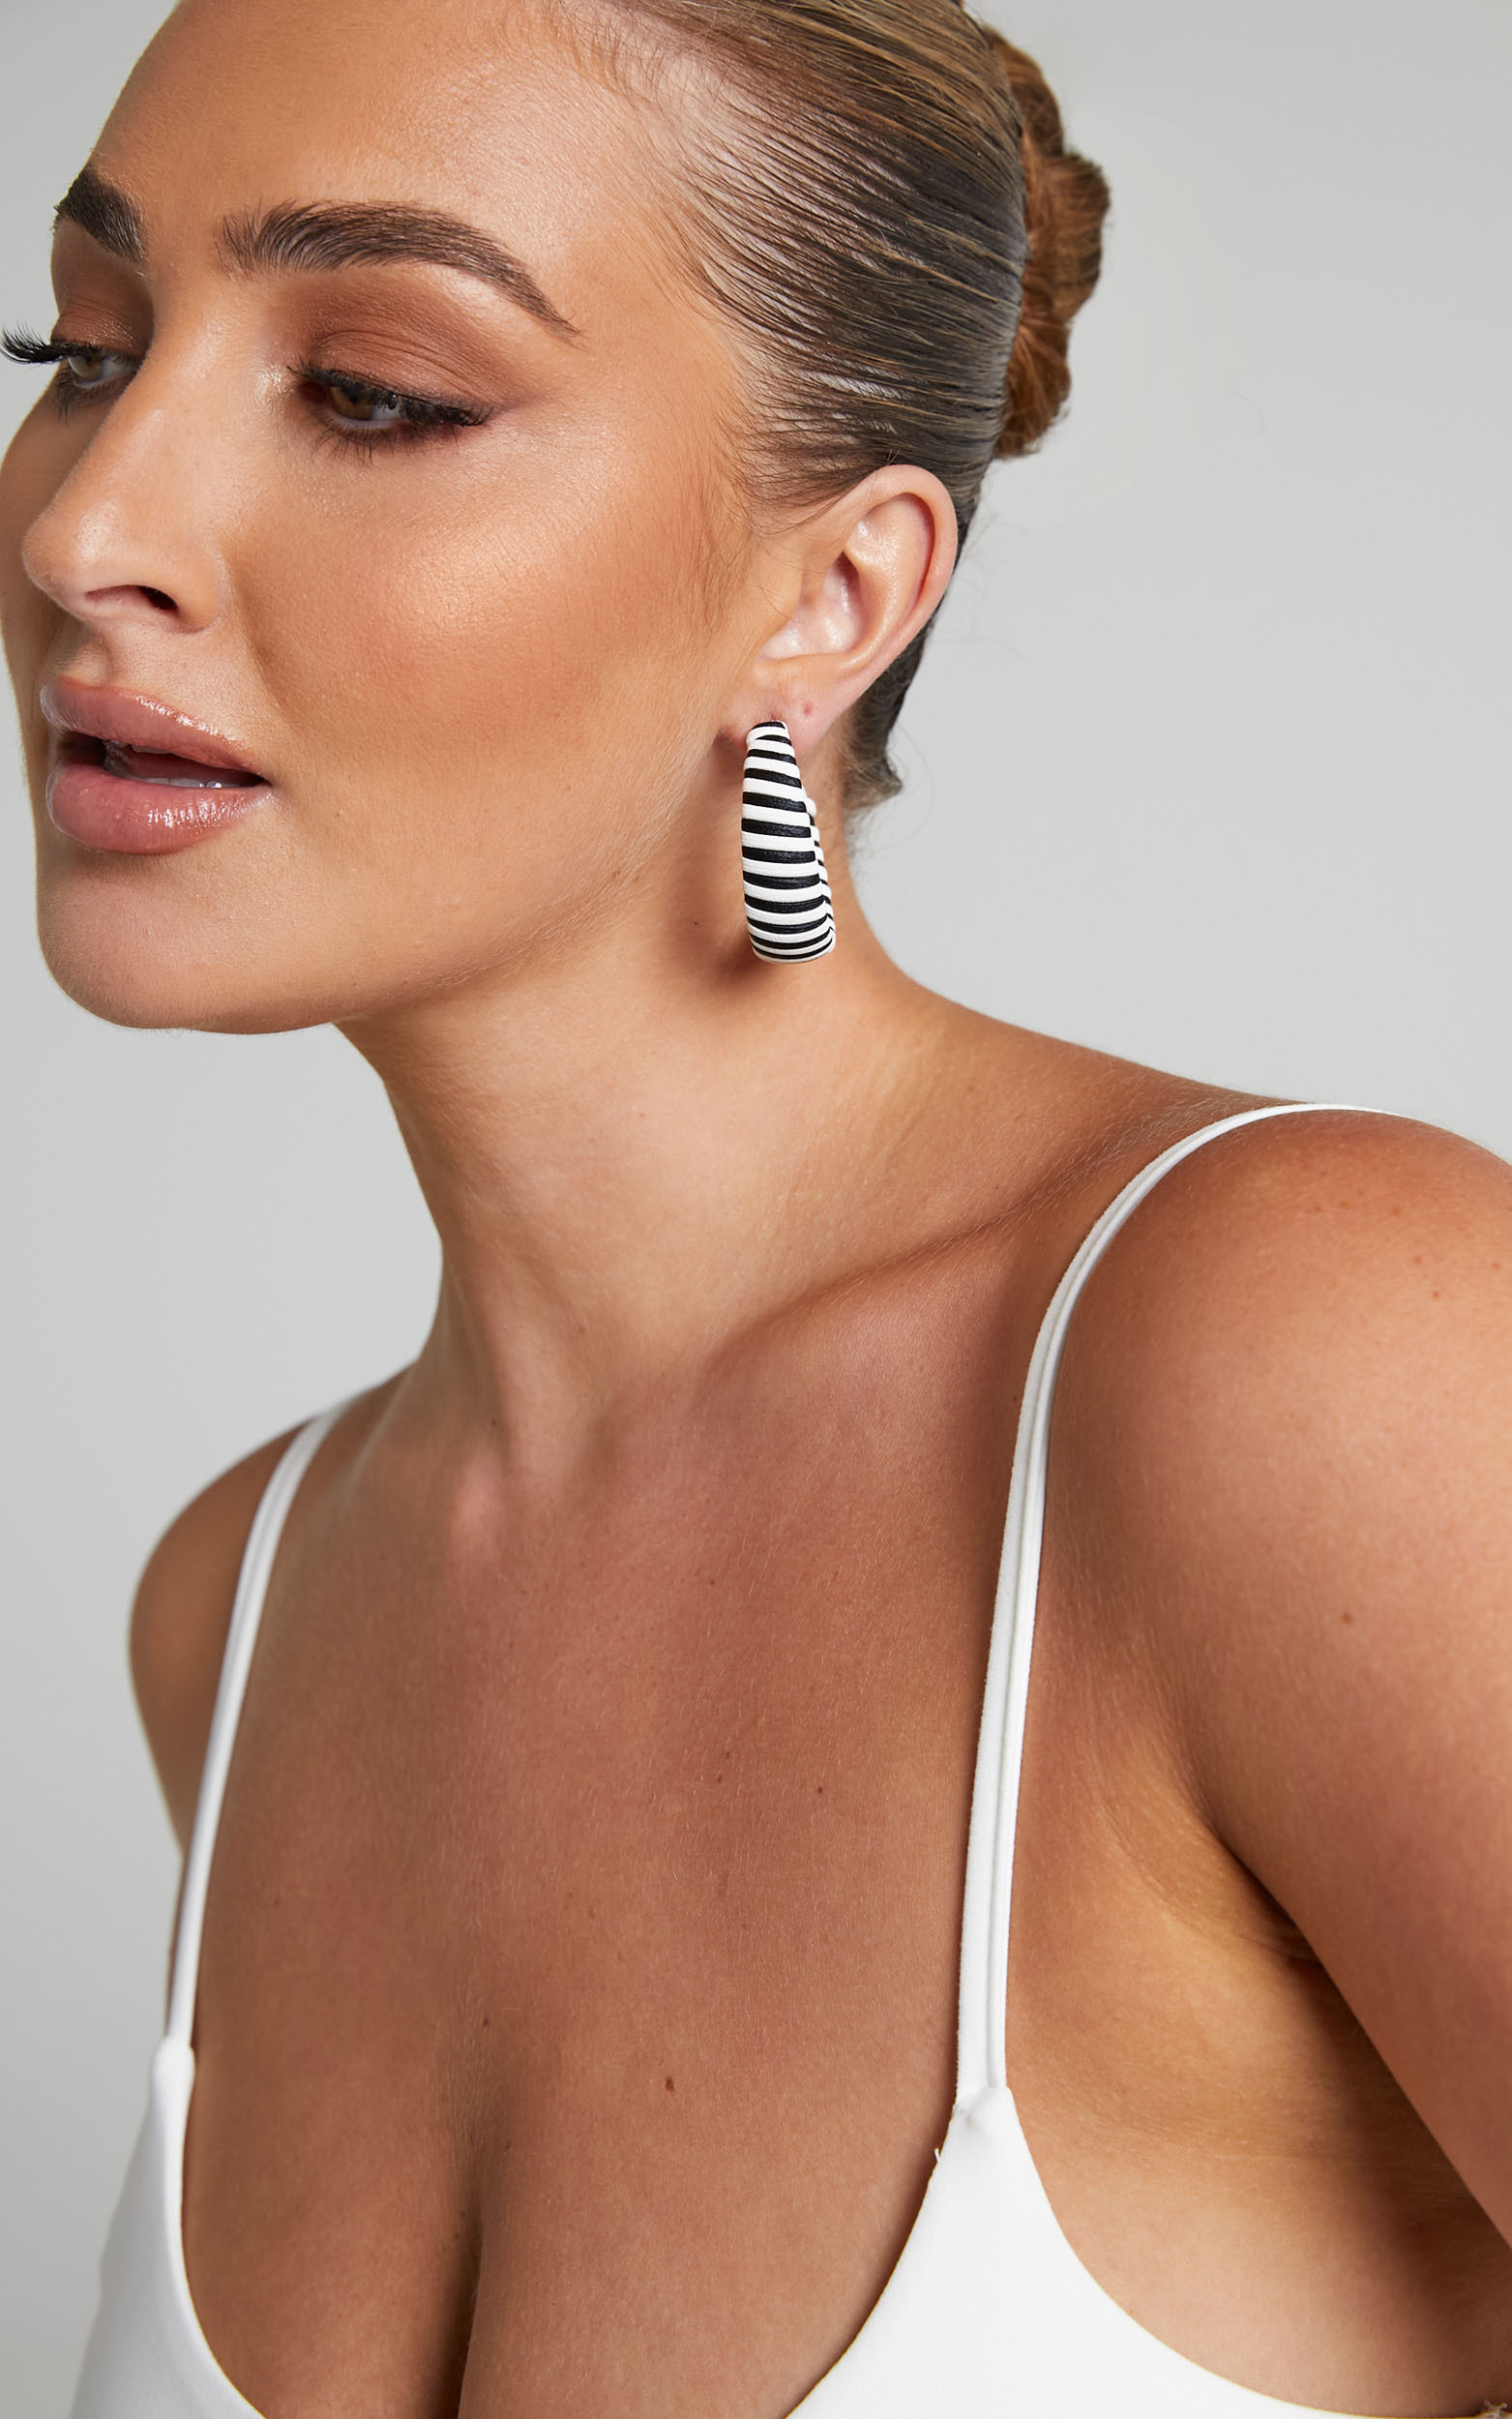 Noreen Earrings in Black/White - OneSize, BLK1, hi-res image number null